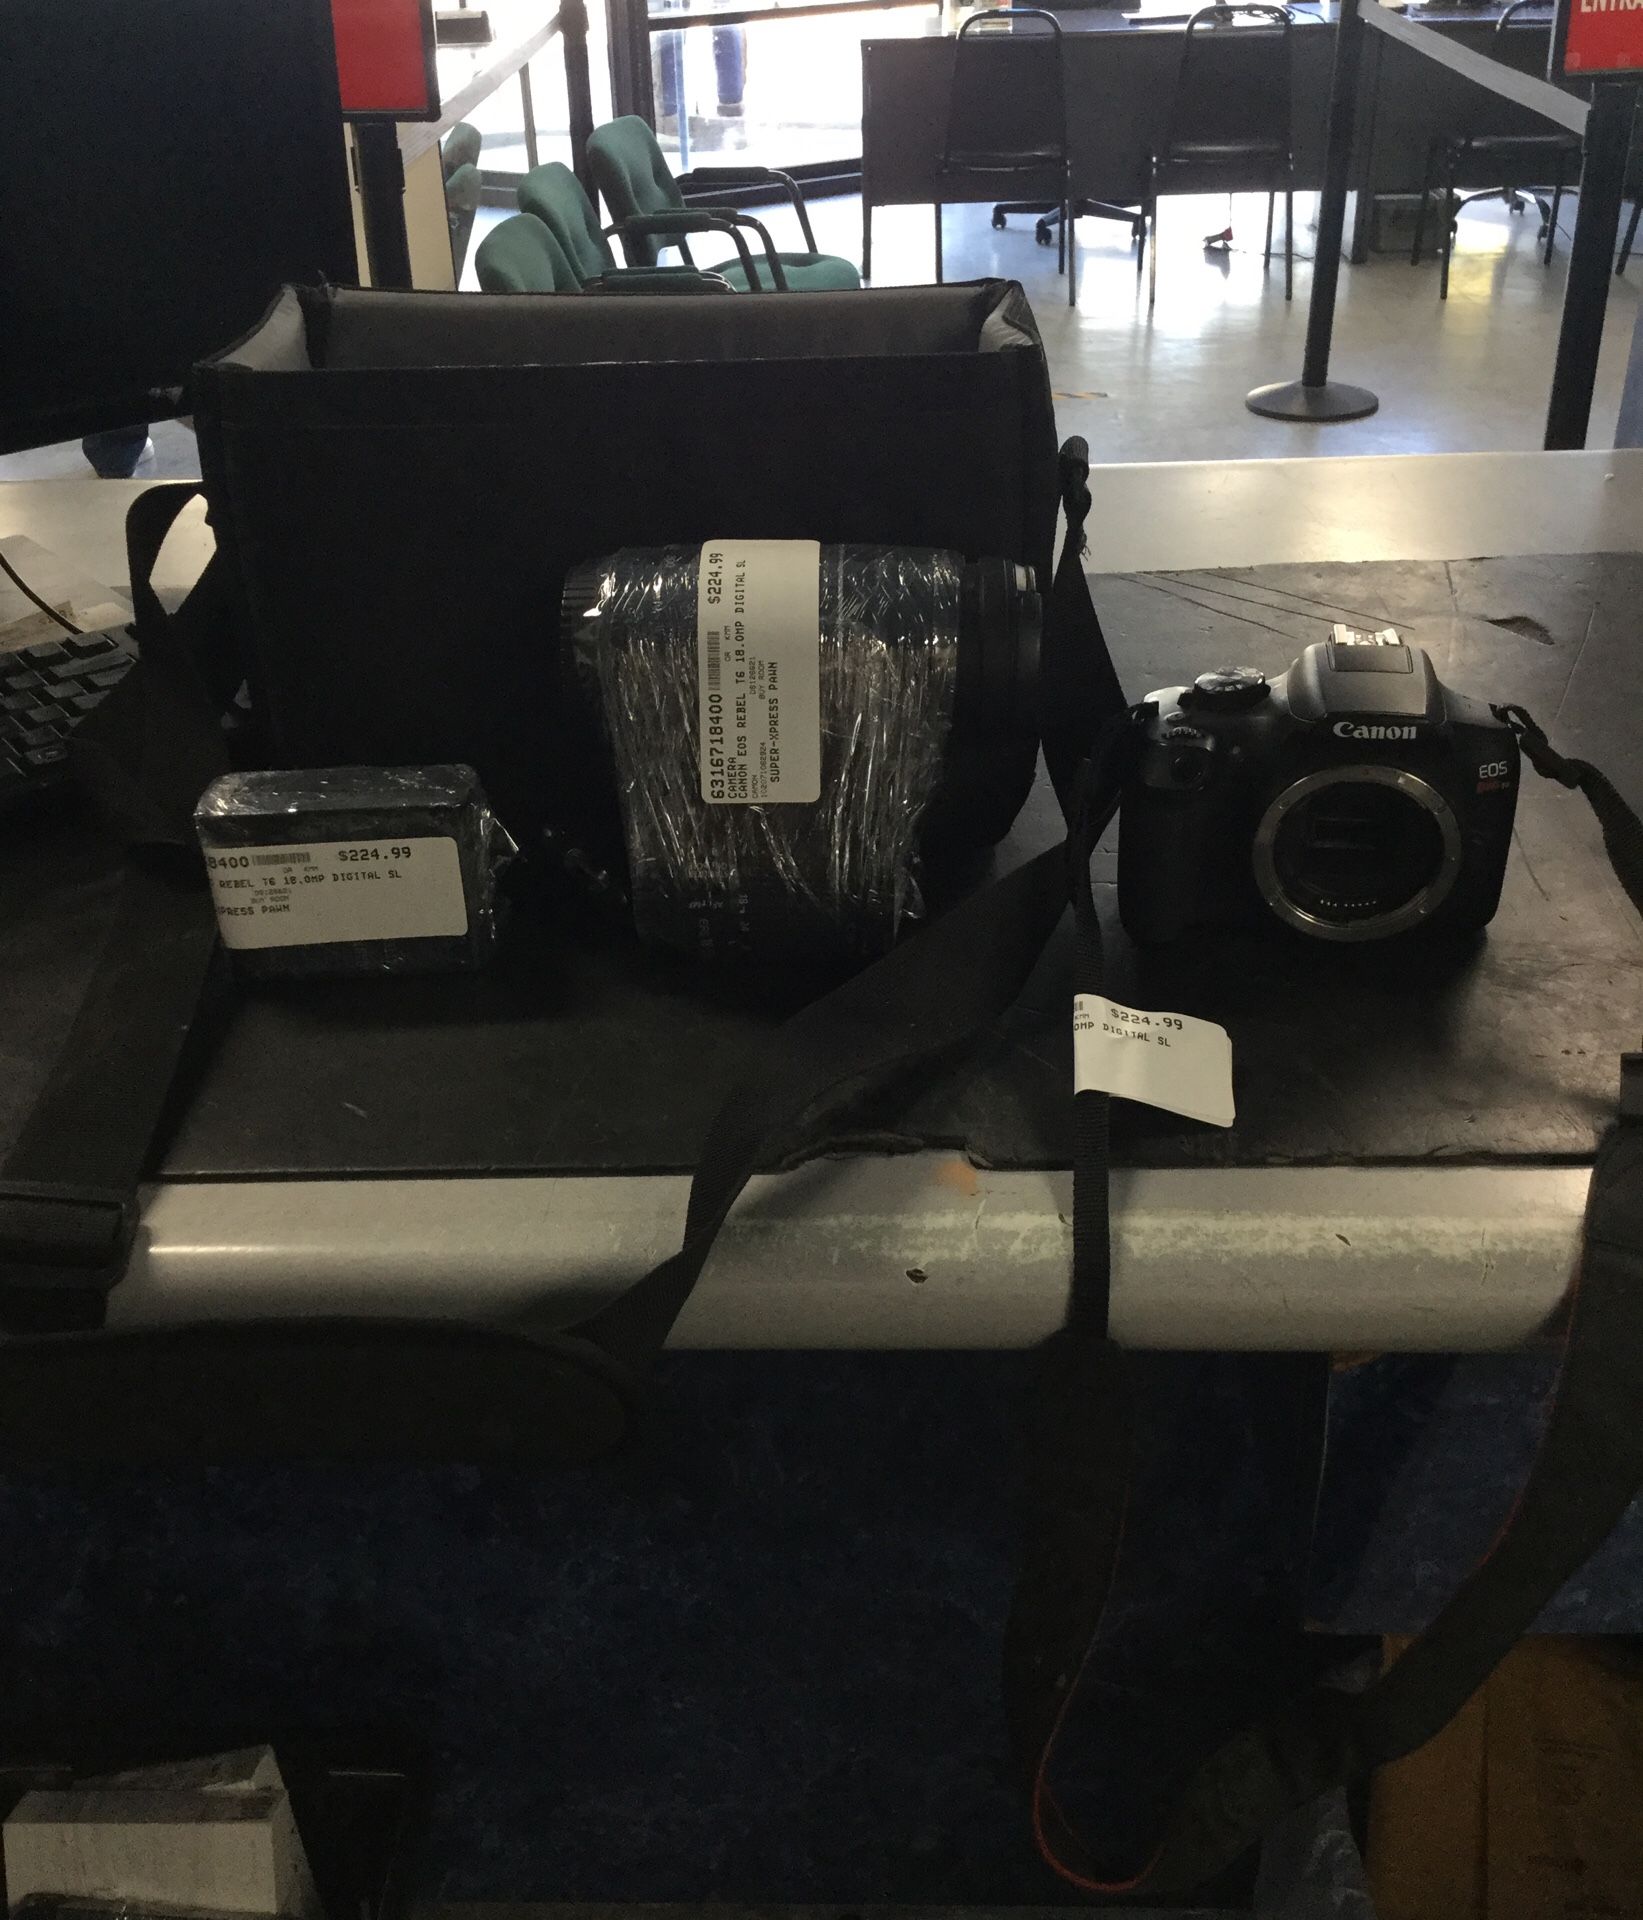 Canon eos rebel t6 ds126621 2 lenses (75-300mm) & (18-55mm) and charger with a carrying bag.